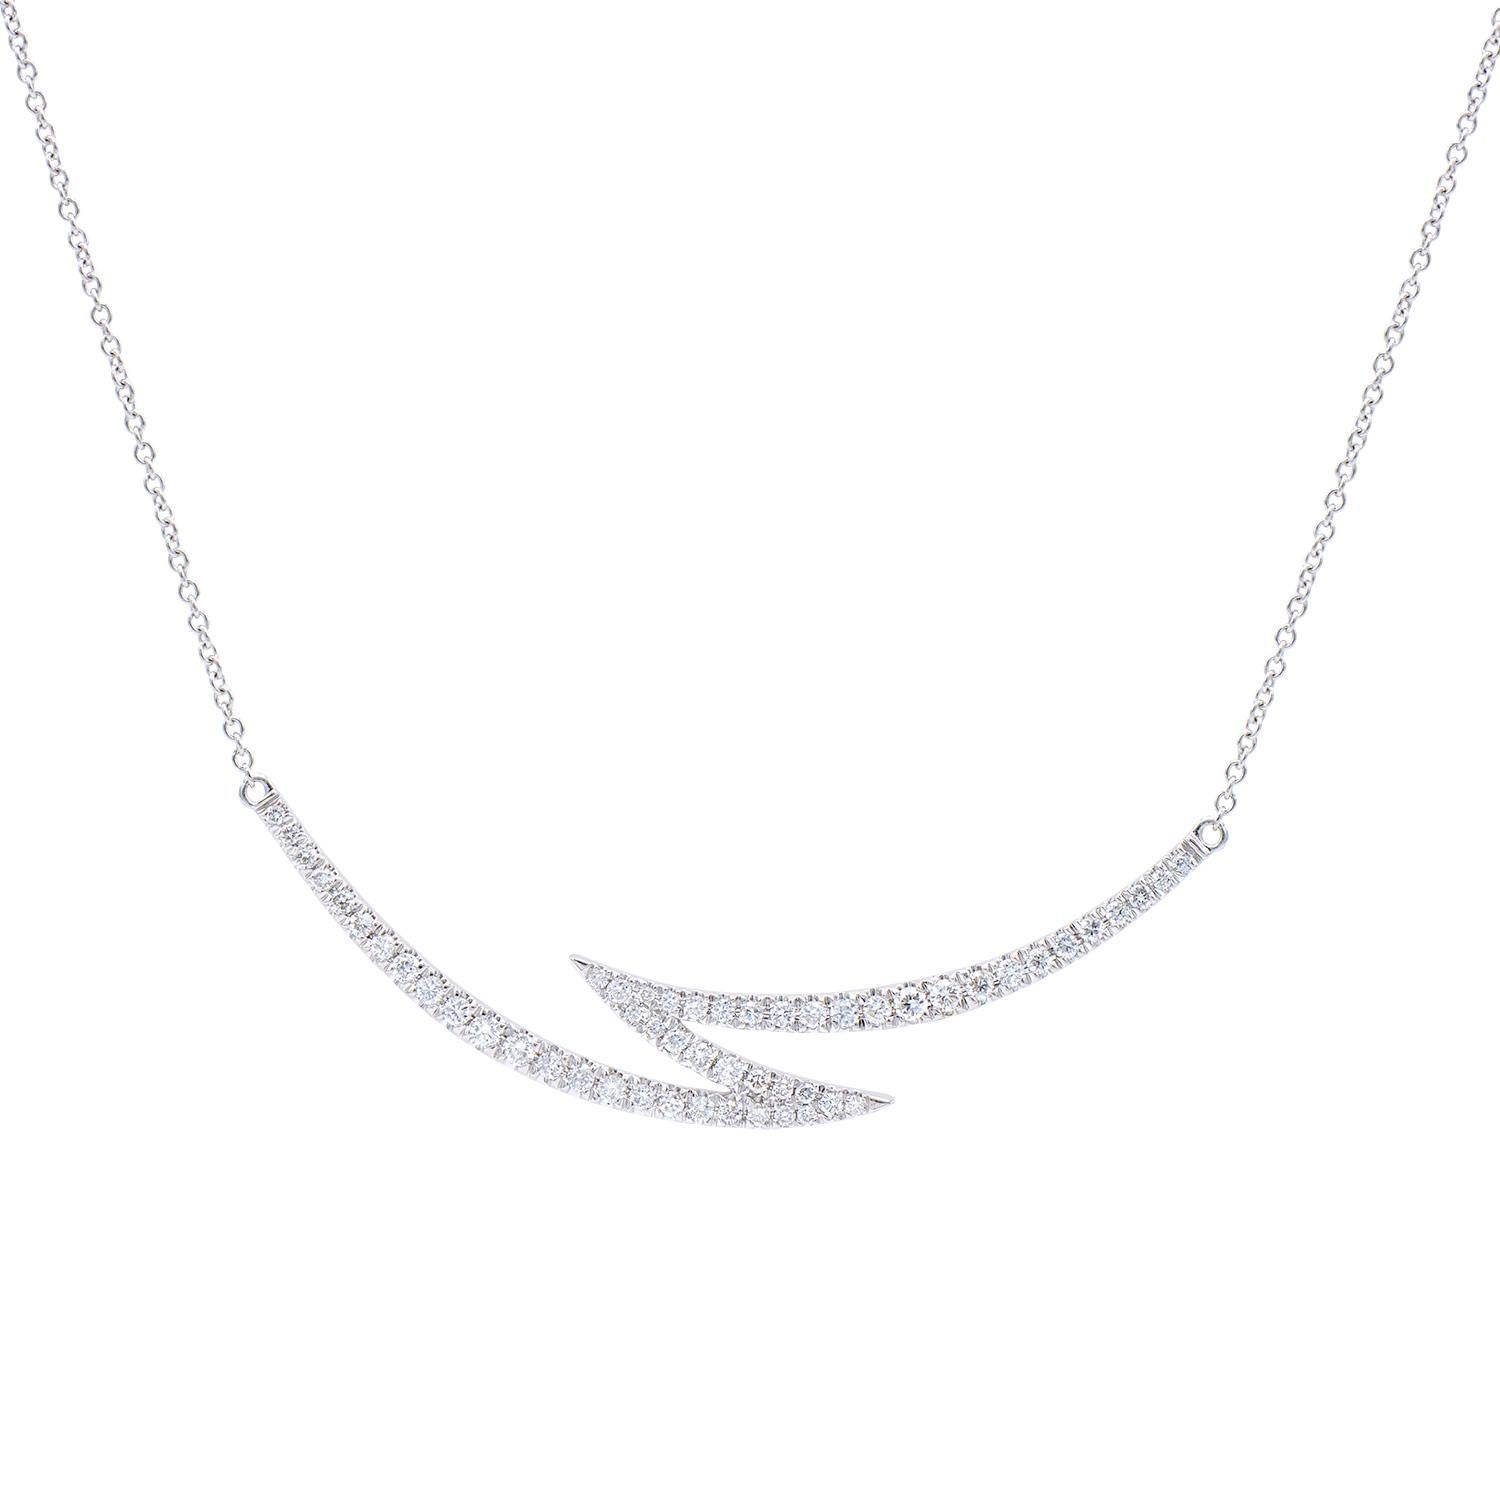 Show someone you care with the beautiful diamond necklace. This gorgeous necklace can be dressed up or down as a perfect accessory and can be worn all the time. The unique lightning shape is made from 54 round VS2, G color diamonds totaling 0.30